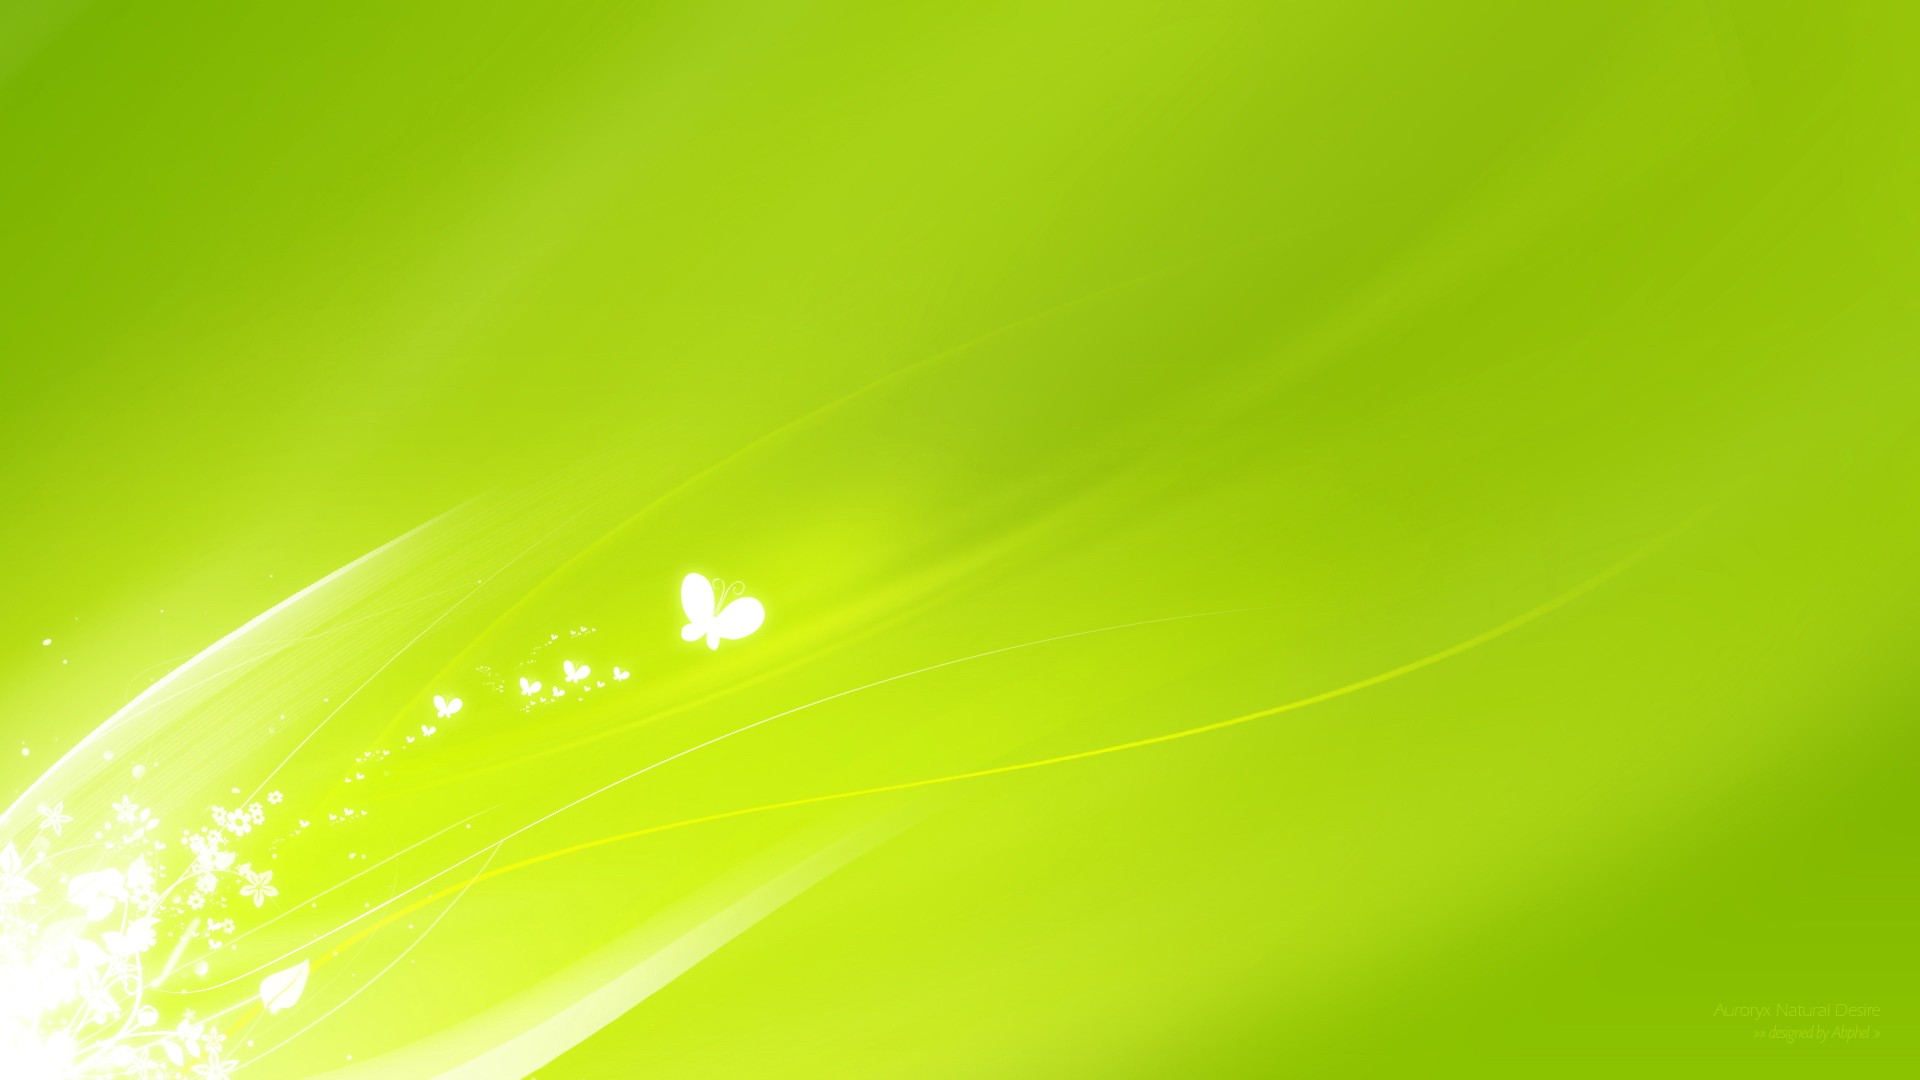 Lime Green Background Wallpaper HD with image resolution 1920x1080 pixel. You can make this wallpaper for your Desktop Computer Backgrounds, Mac Wallpapers, Android Lock screen or iPhone Screensavers